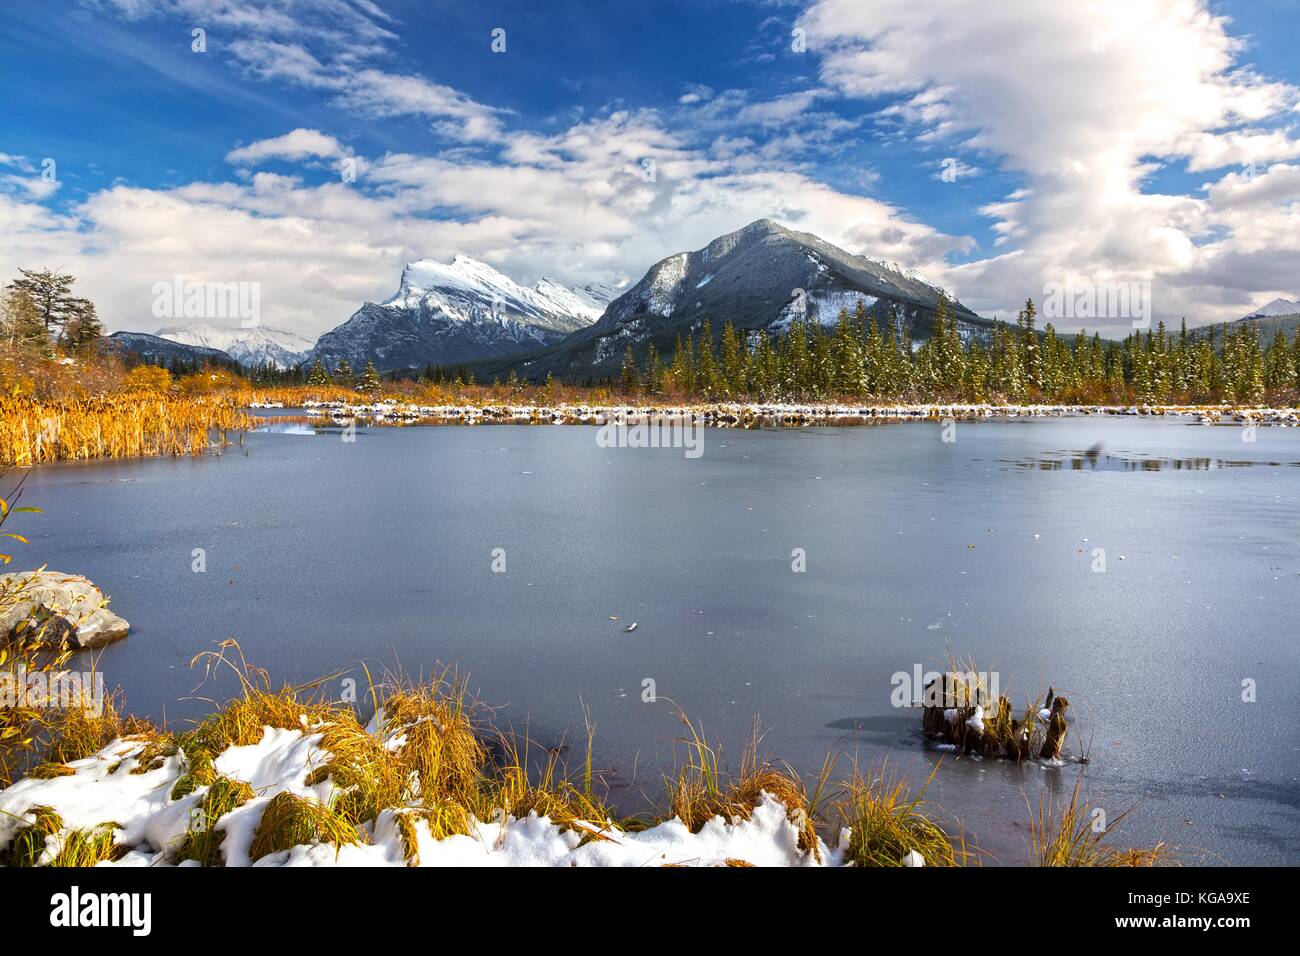 Vermilion Lakes Scenic Landscape Panorama autunnale e montagna lontana innevata Top in Banff National Park Canadian Rocky Mountains Foto Stock